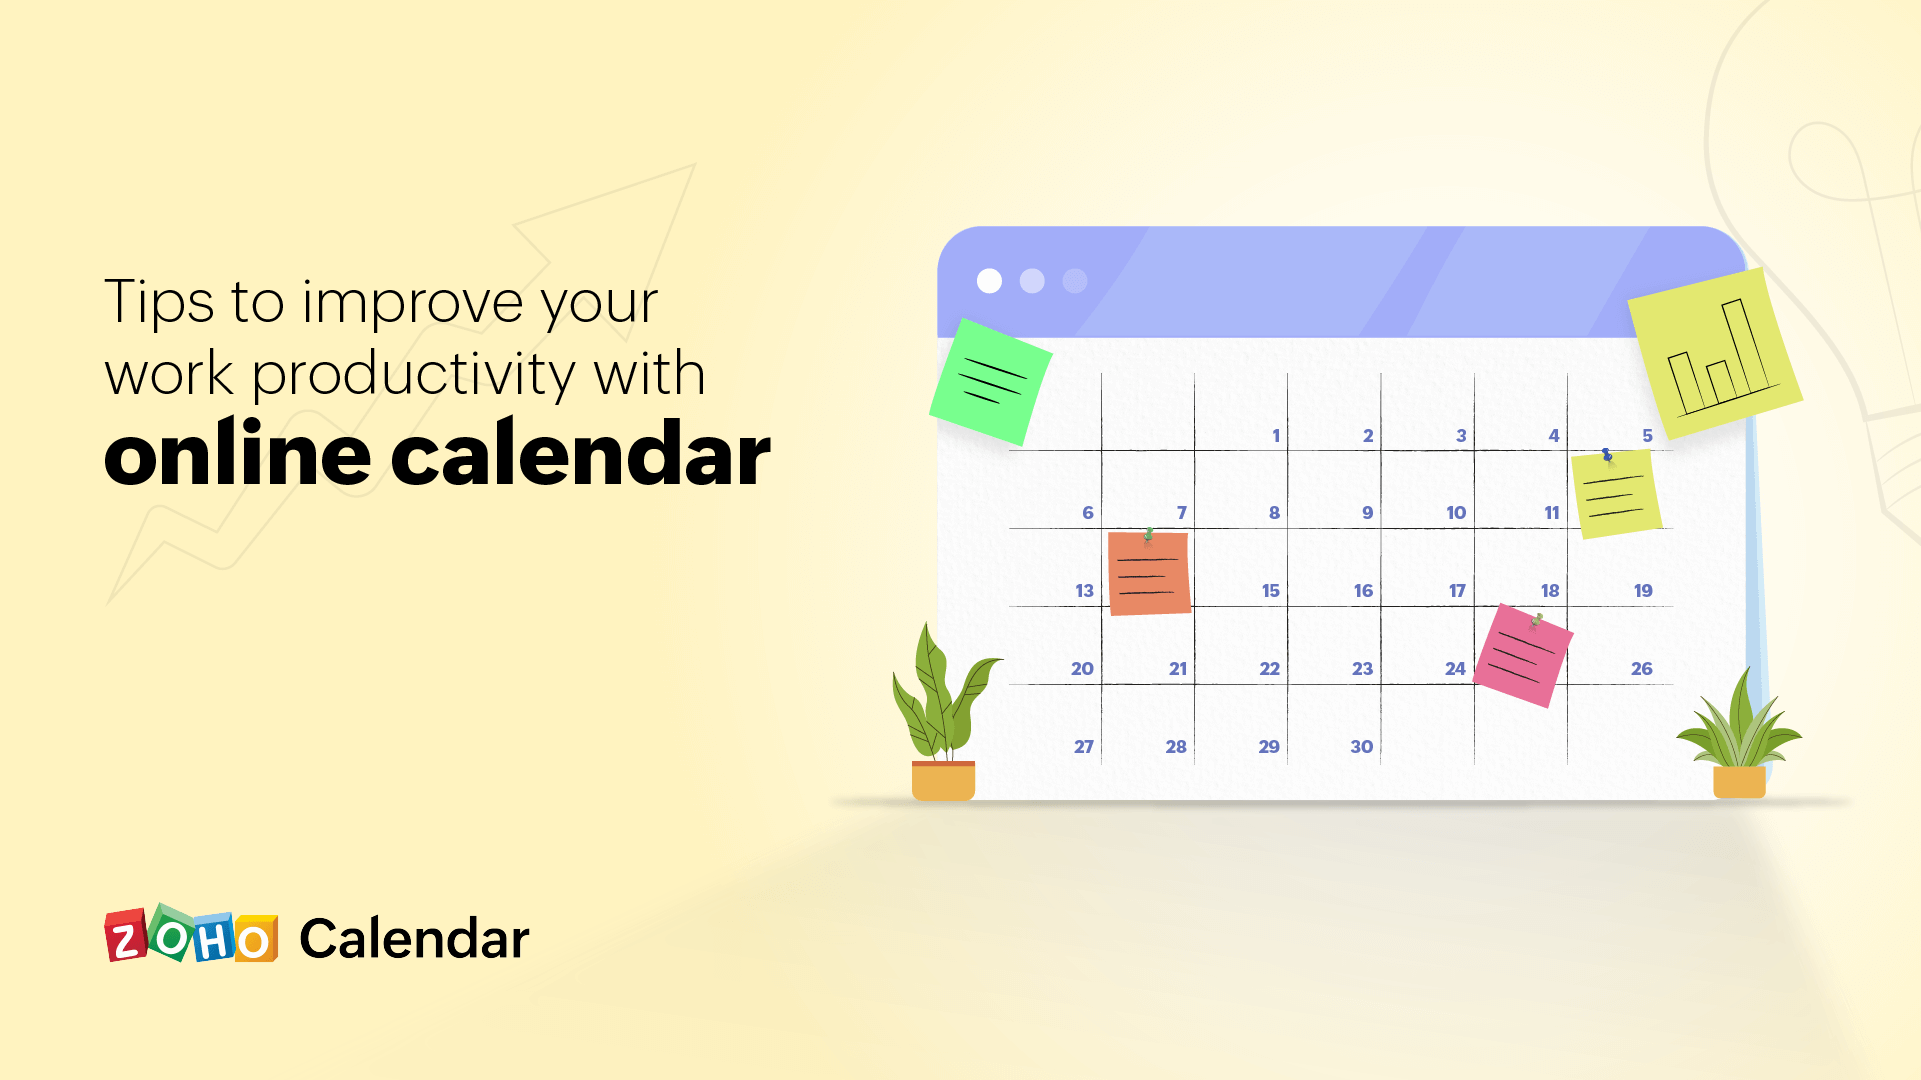 Tips to improve your work productivity with an online calendar 